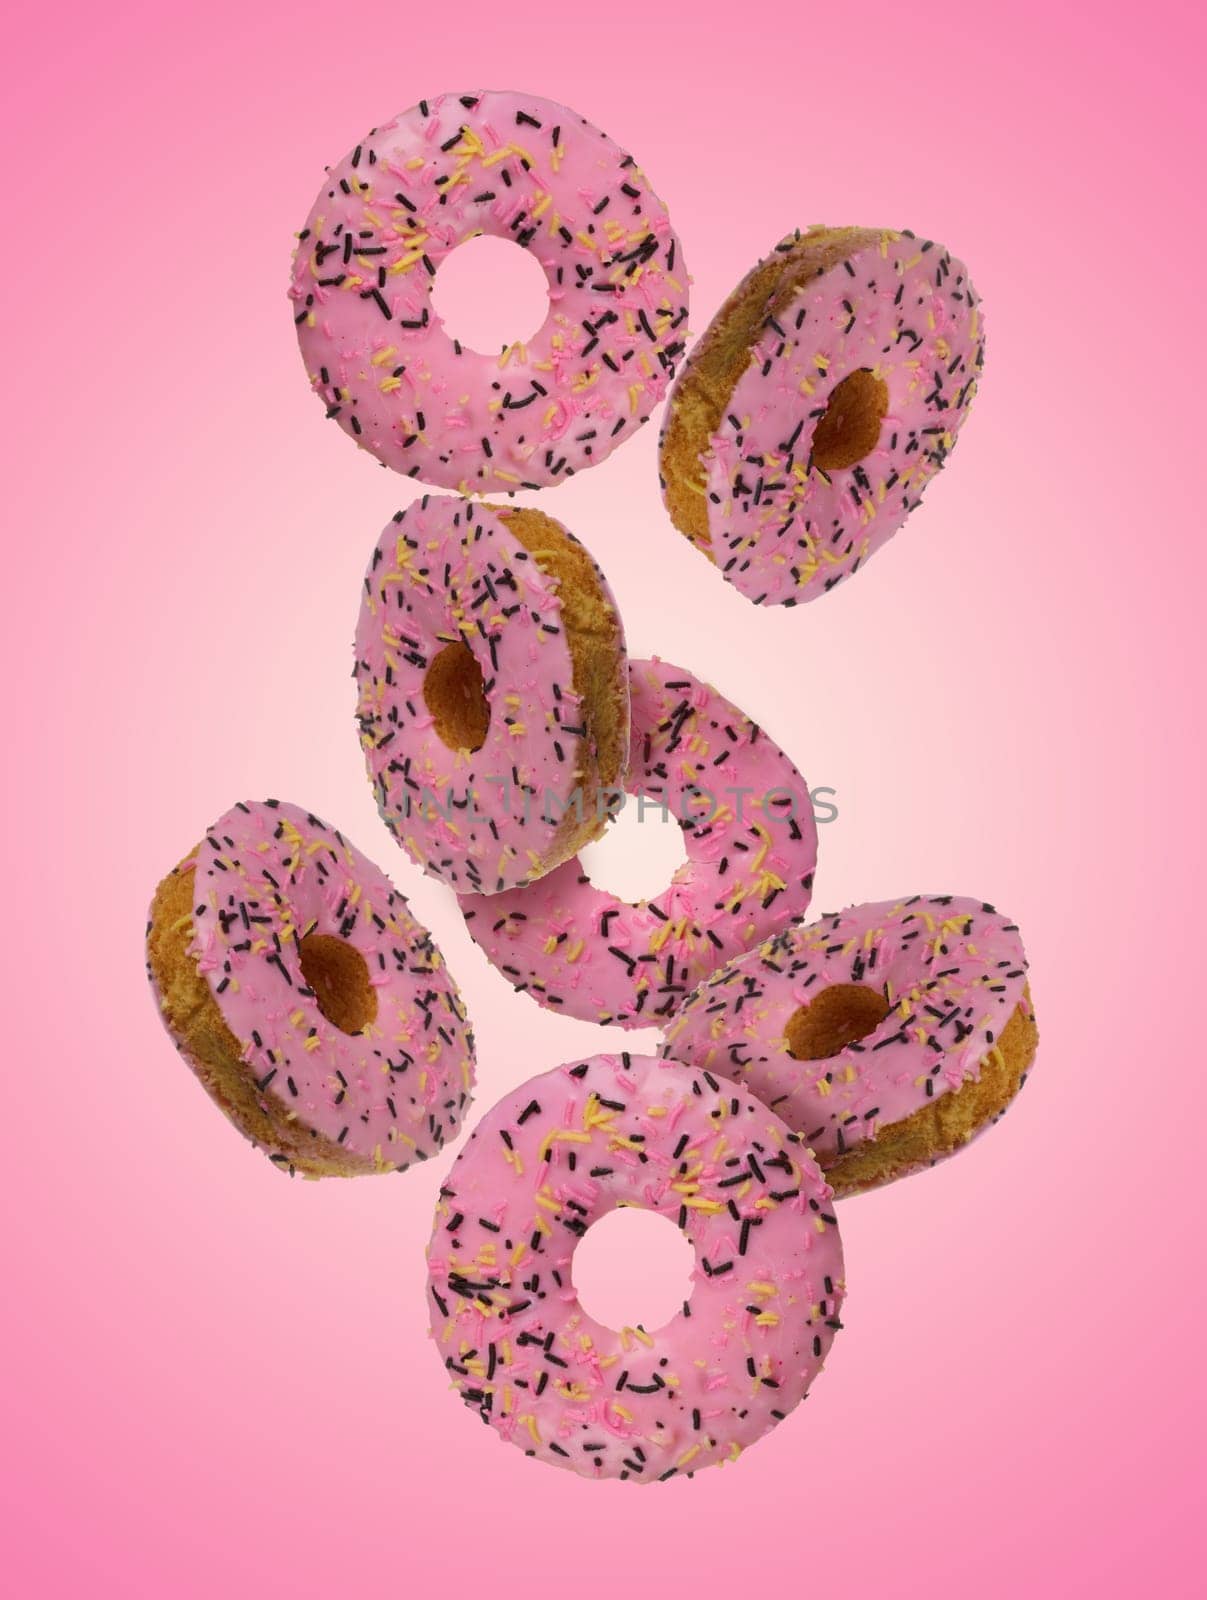 Donuts with pink glaze and sprinkled with colorful sprinkles levitate on a pink background by ndanko